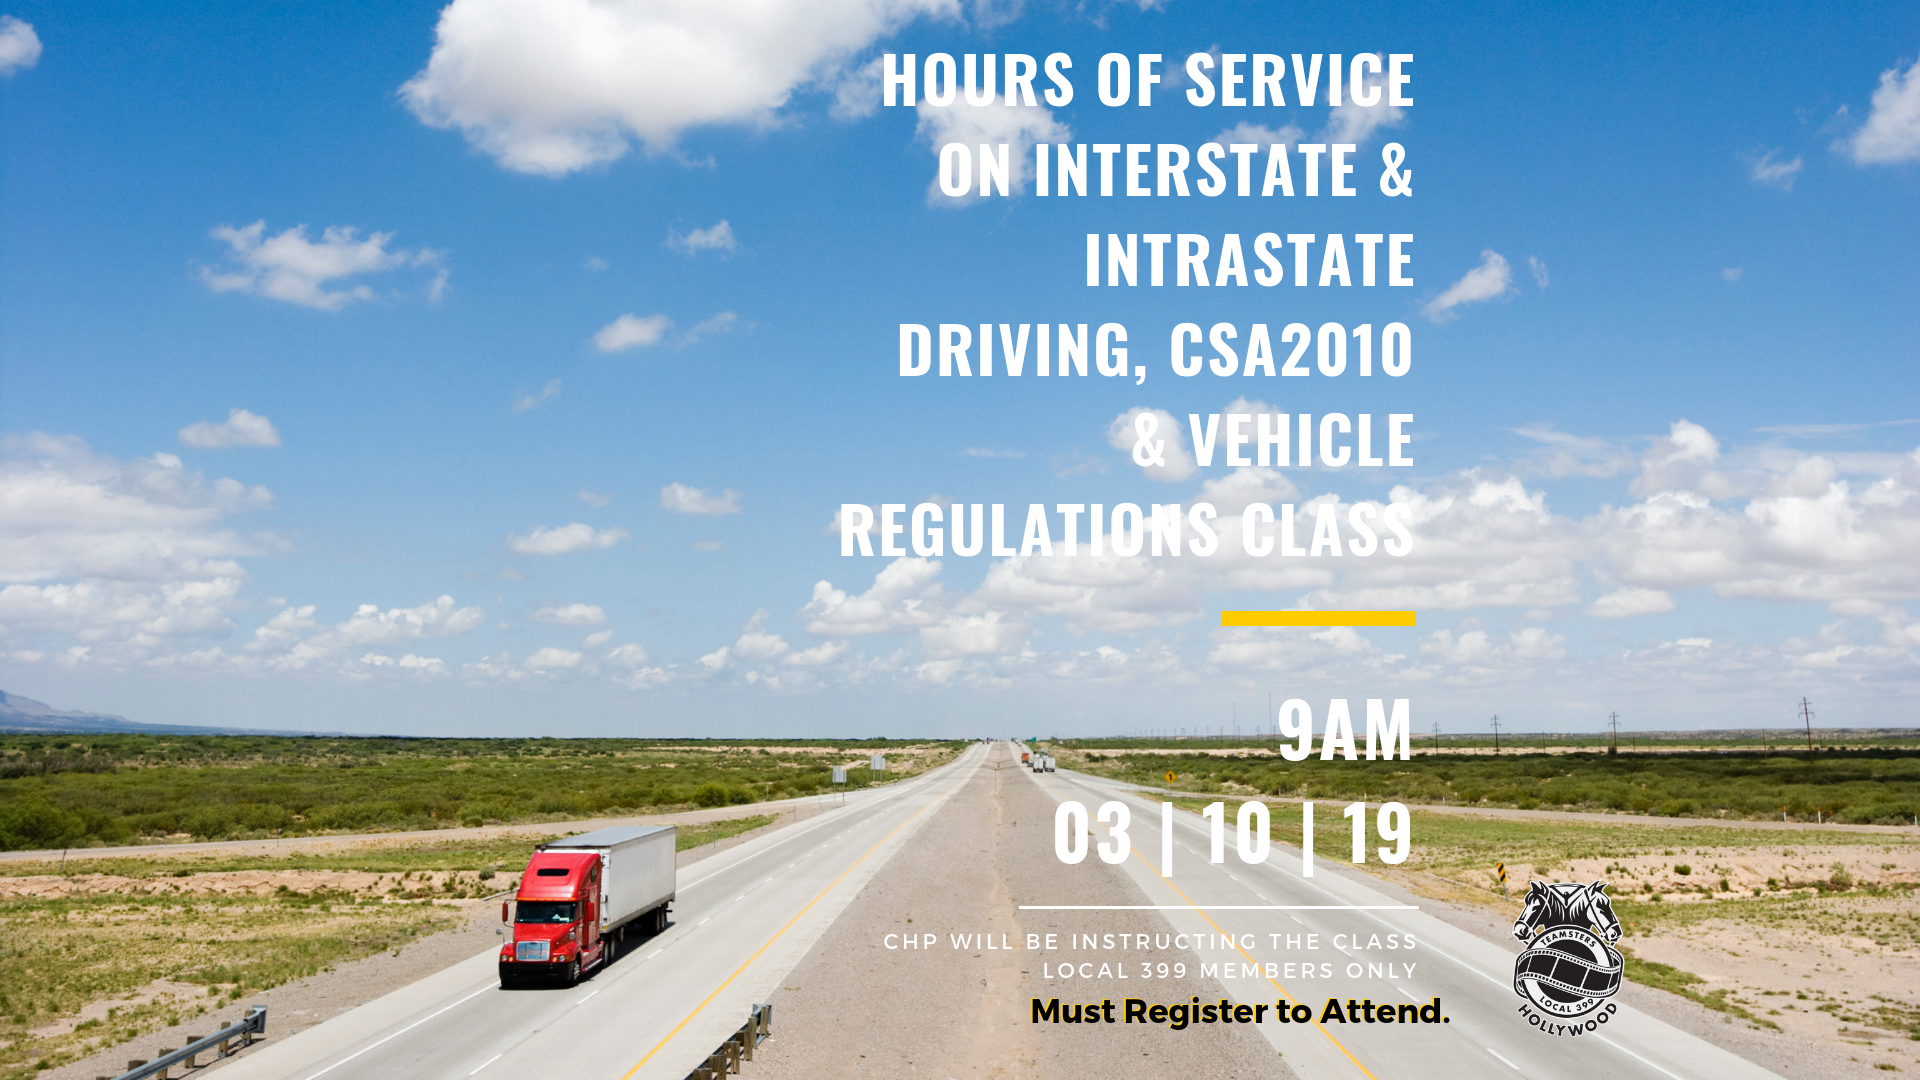 DOT Hours of Service 2020